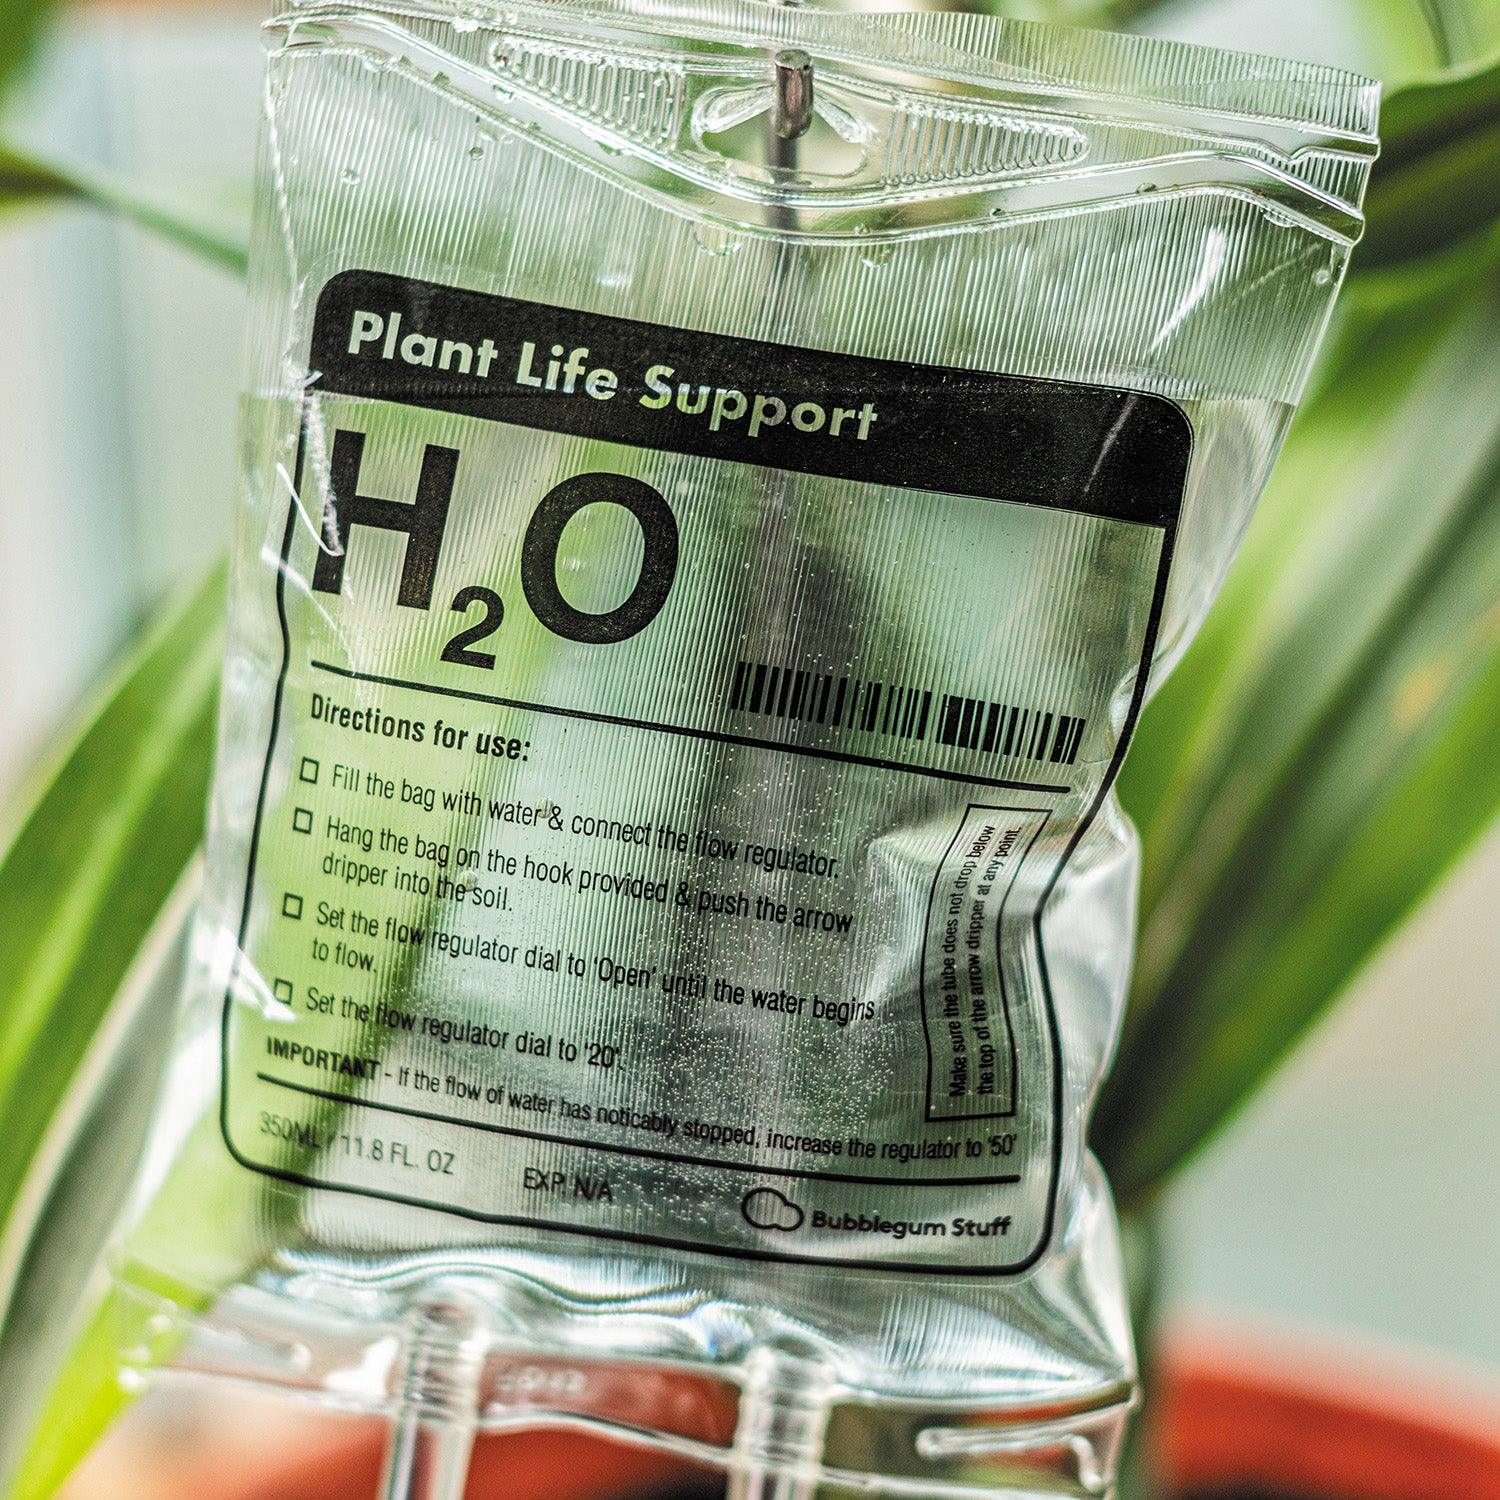 Plant Life Support - Home Accessories - Science Museum Shop